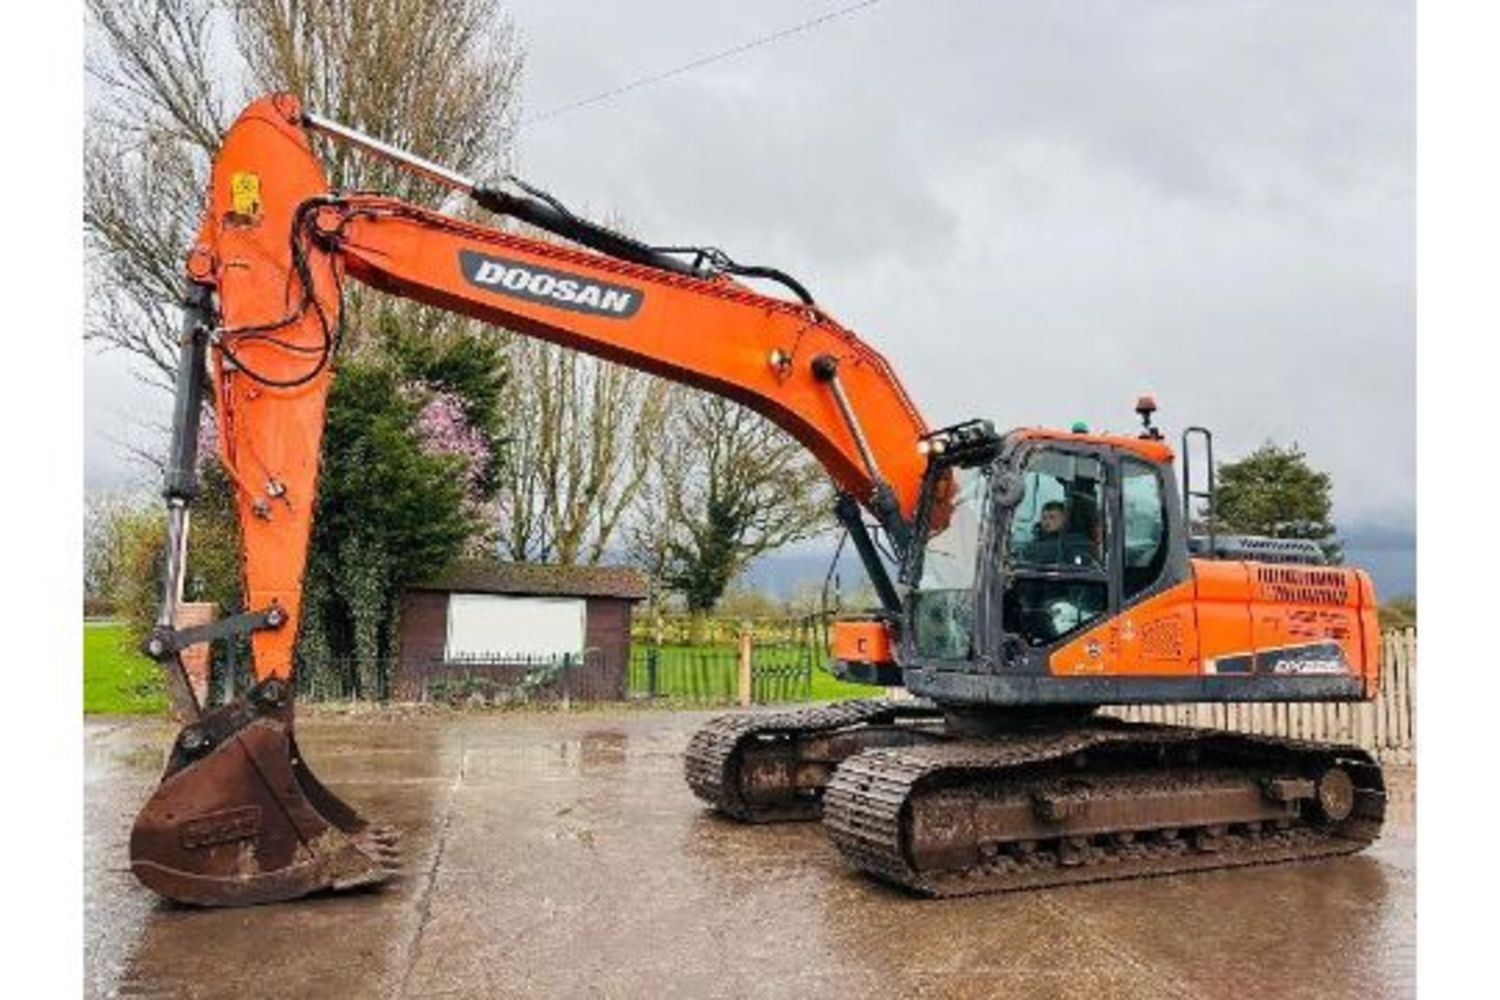  HAND PICKED SELECTION OF PLANT | Including Excavators, Dumpers, Generators, Access Lifts, Rollers & More ending Friday 5th April at 1.30pm